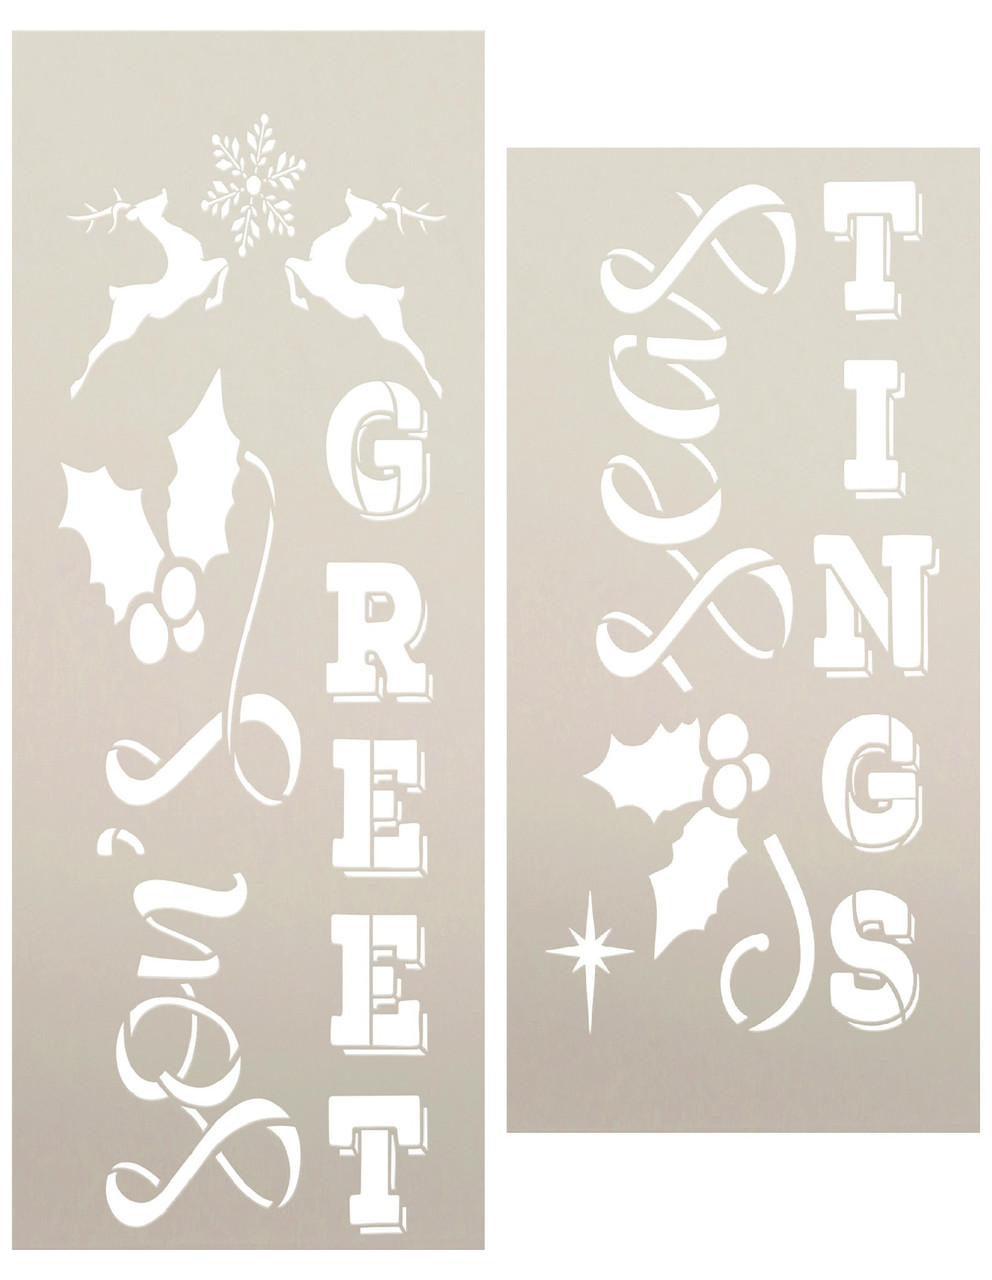 Season's Greetings Tall Porch Stencil by StudioR12 - Select Size - USA Made - Craft DIY Winter Welcome Leaner | Paint Seasonal Wood Sign for Porch, Patio